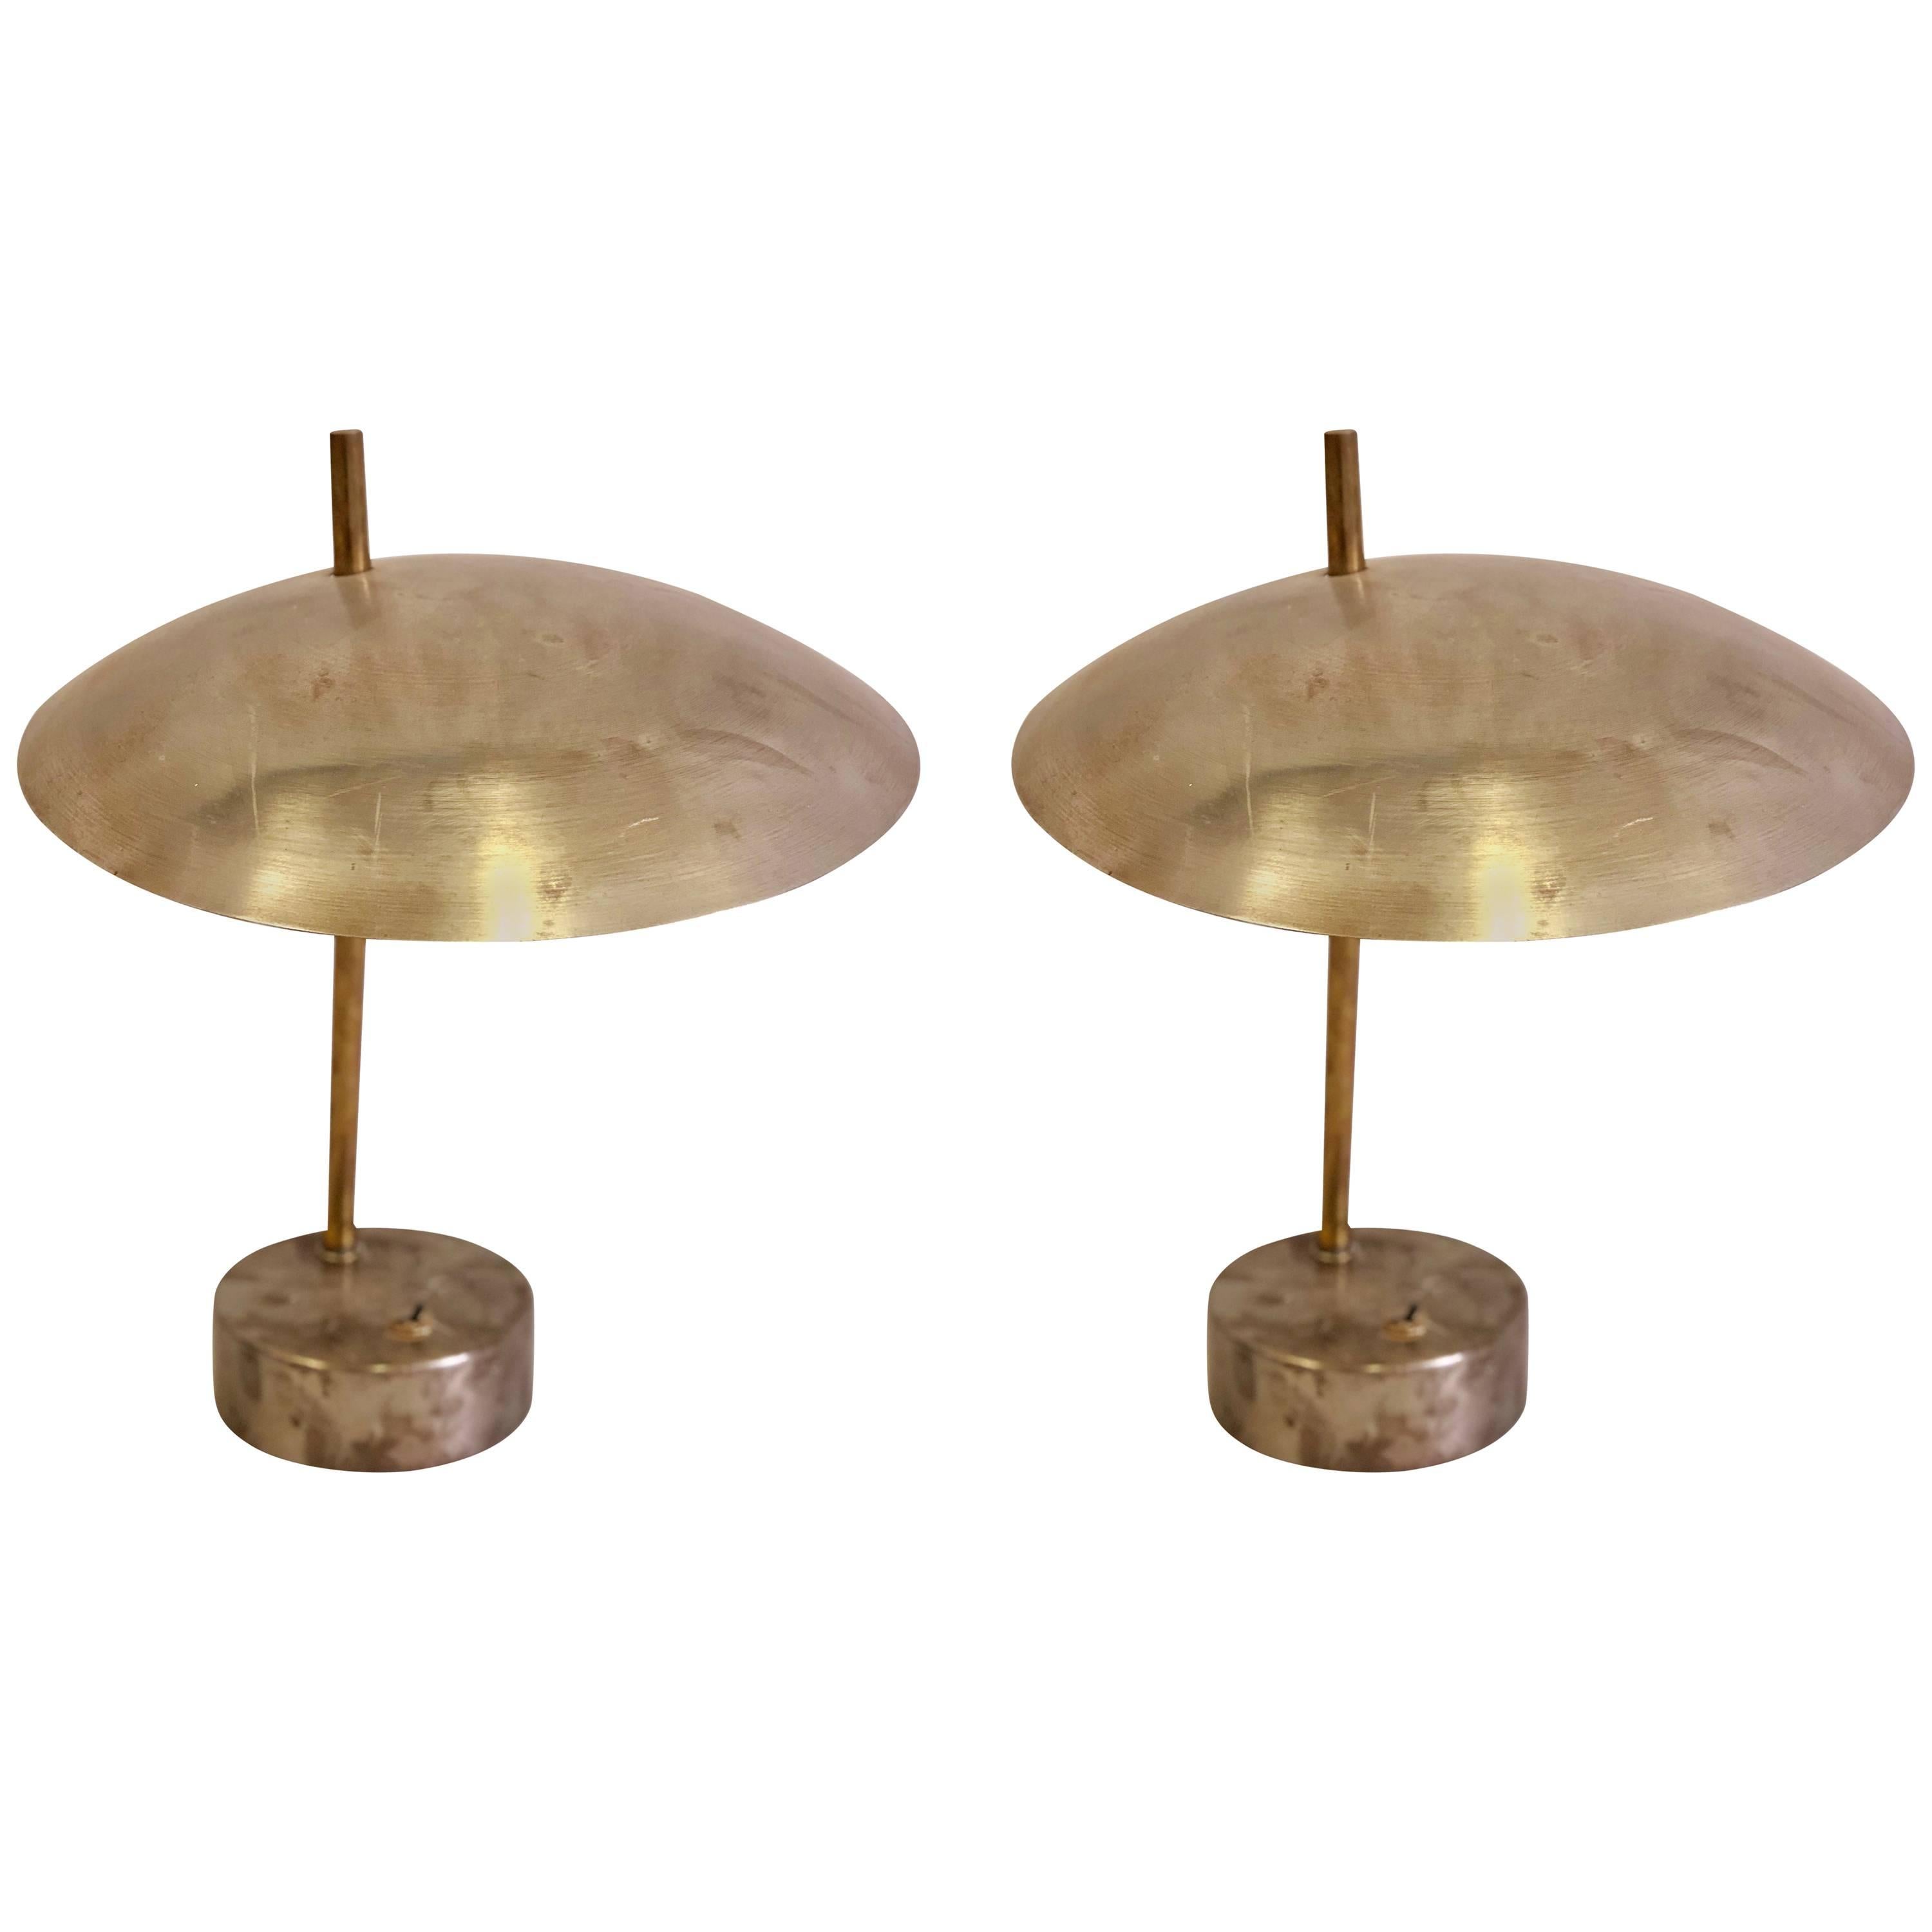 Pair of Mid-Century Modern Industrial Steel and Brass Desk or Table Lamps, 1950